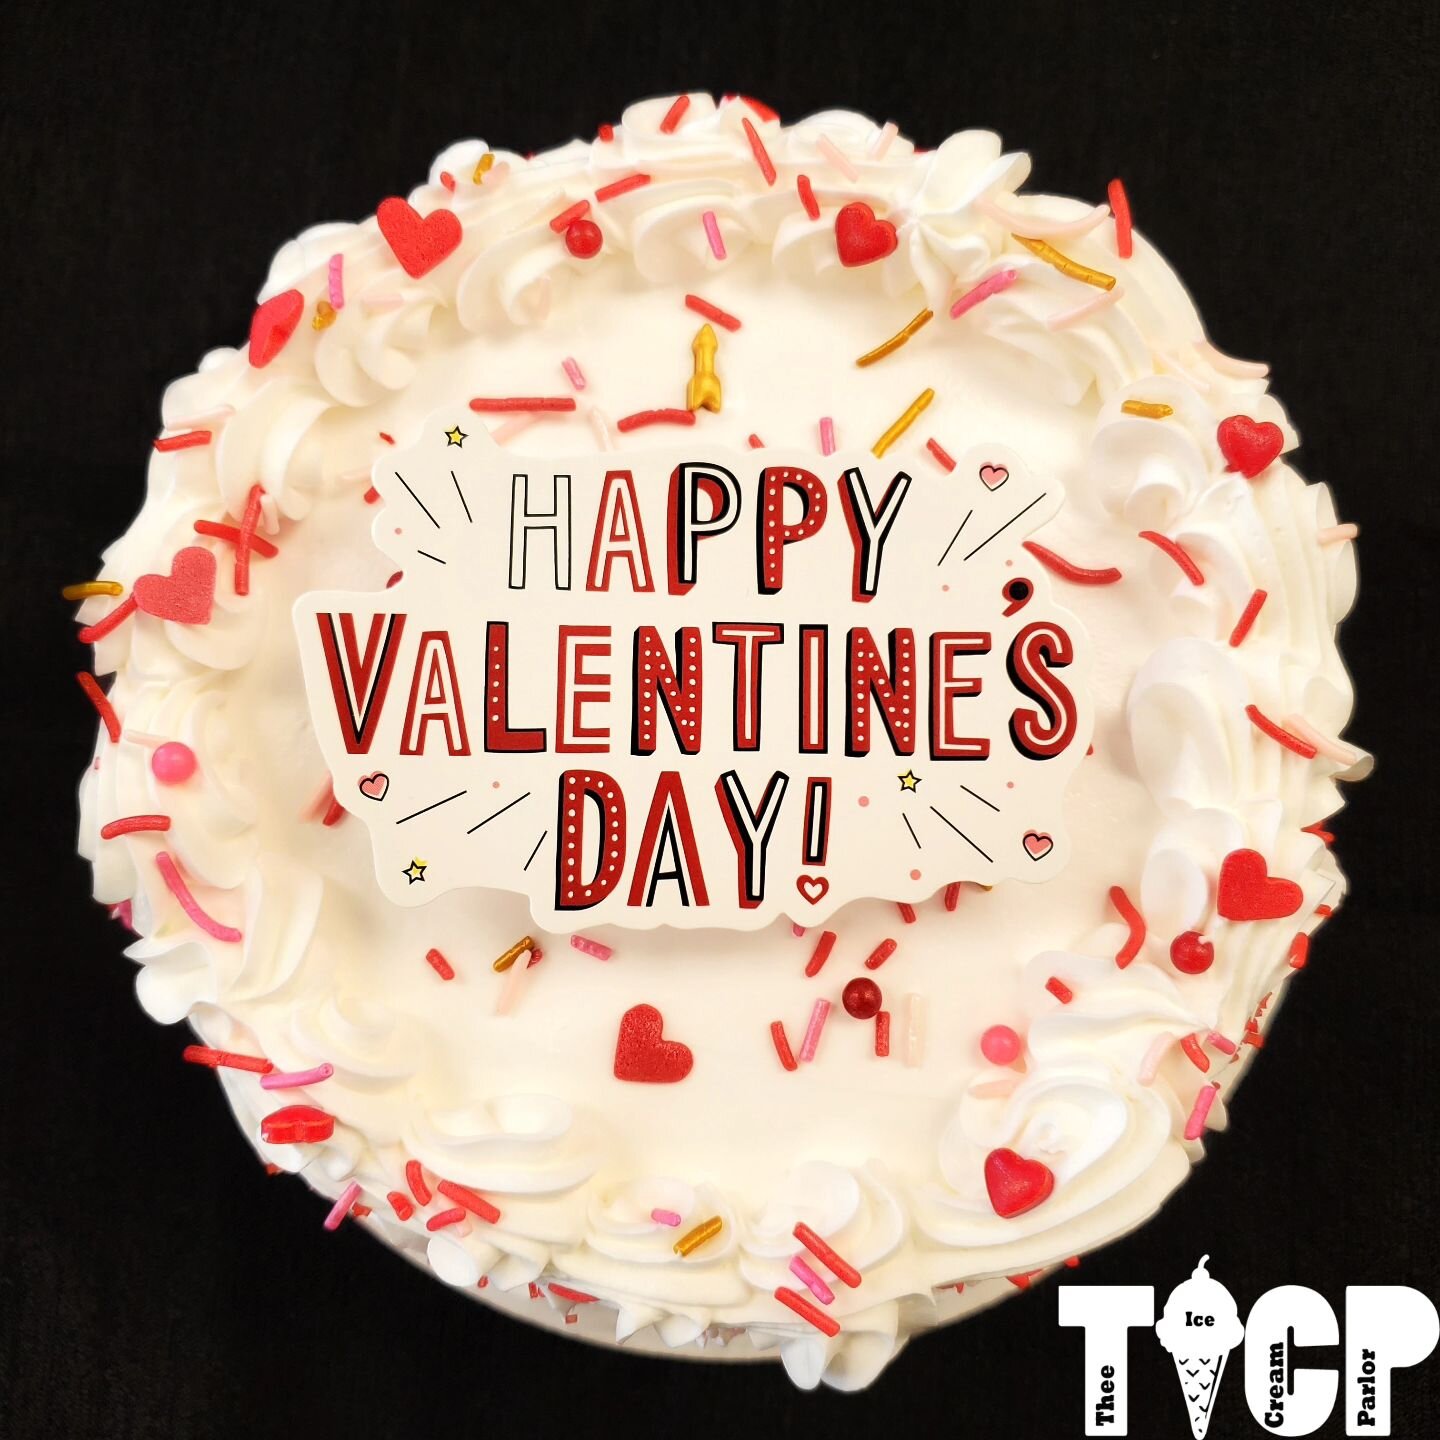 There's still time to order an Valentine's ice cream cake for tomorrow pick up! Call us at 9082841233 to place an order !